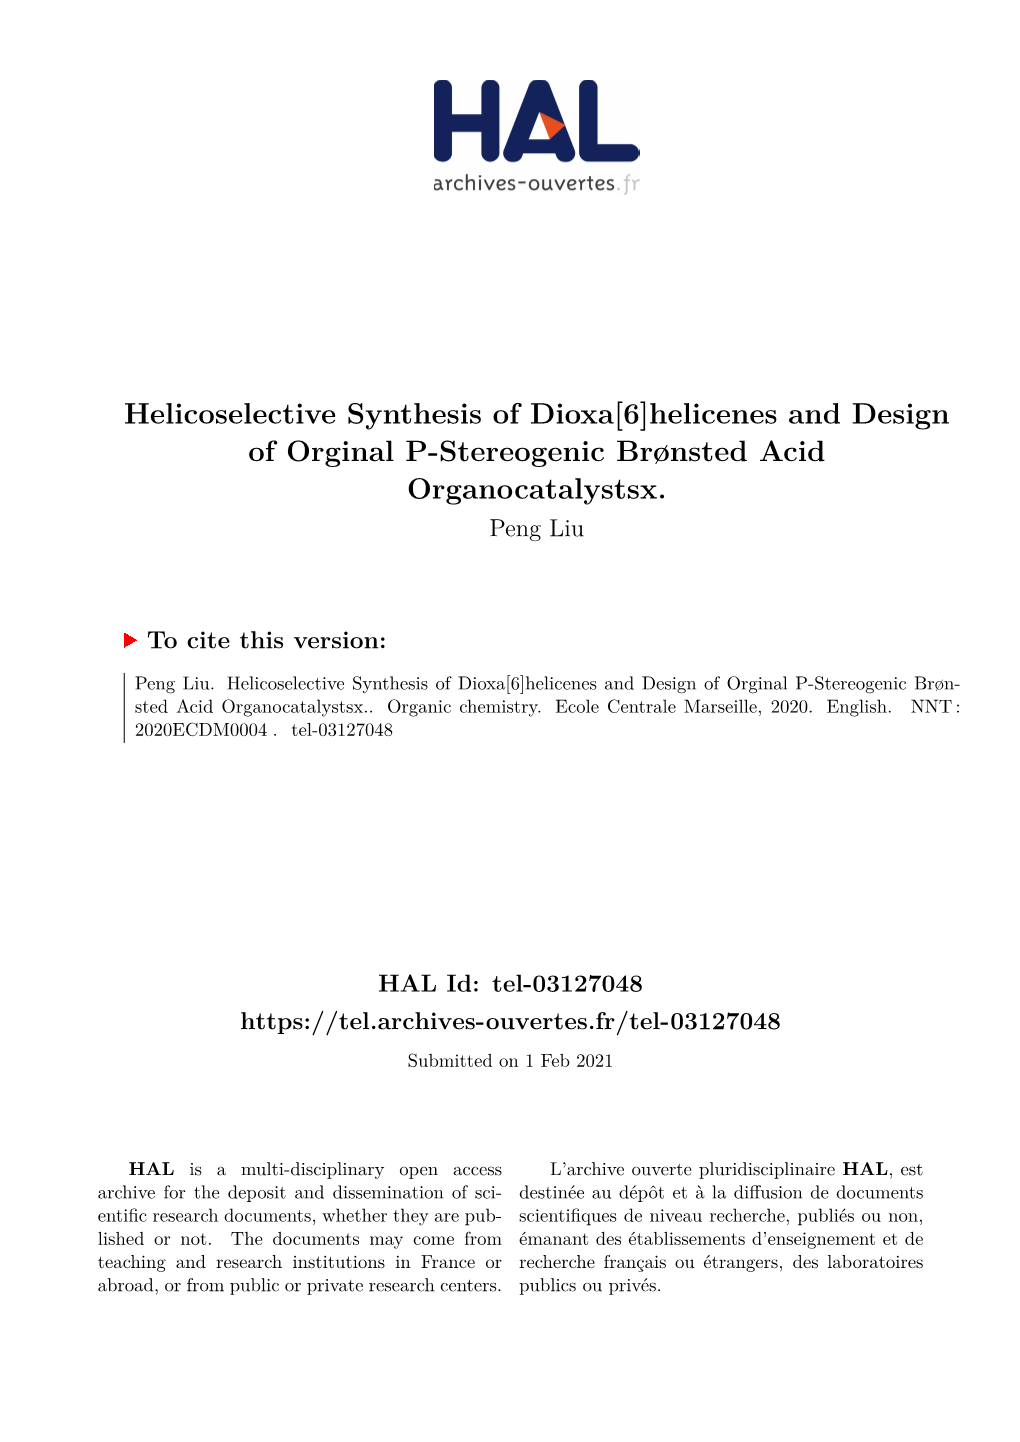 Helicoselective Synthesis of Dioxa[6]Helicenes and Design of Orginal P-Stereogenic Brønsted Acid Organocatalystsx